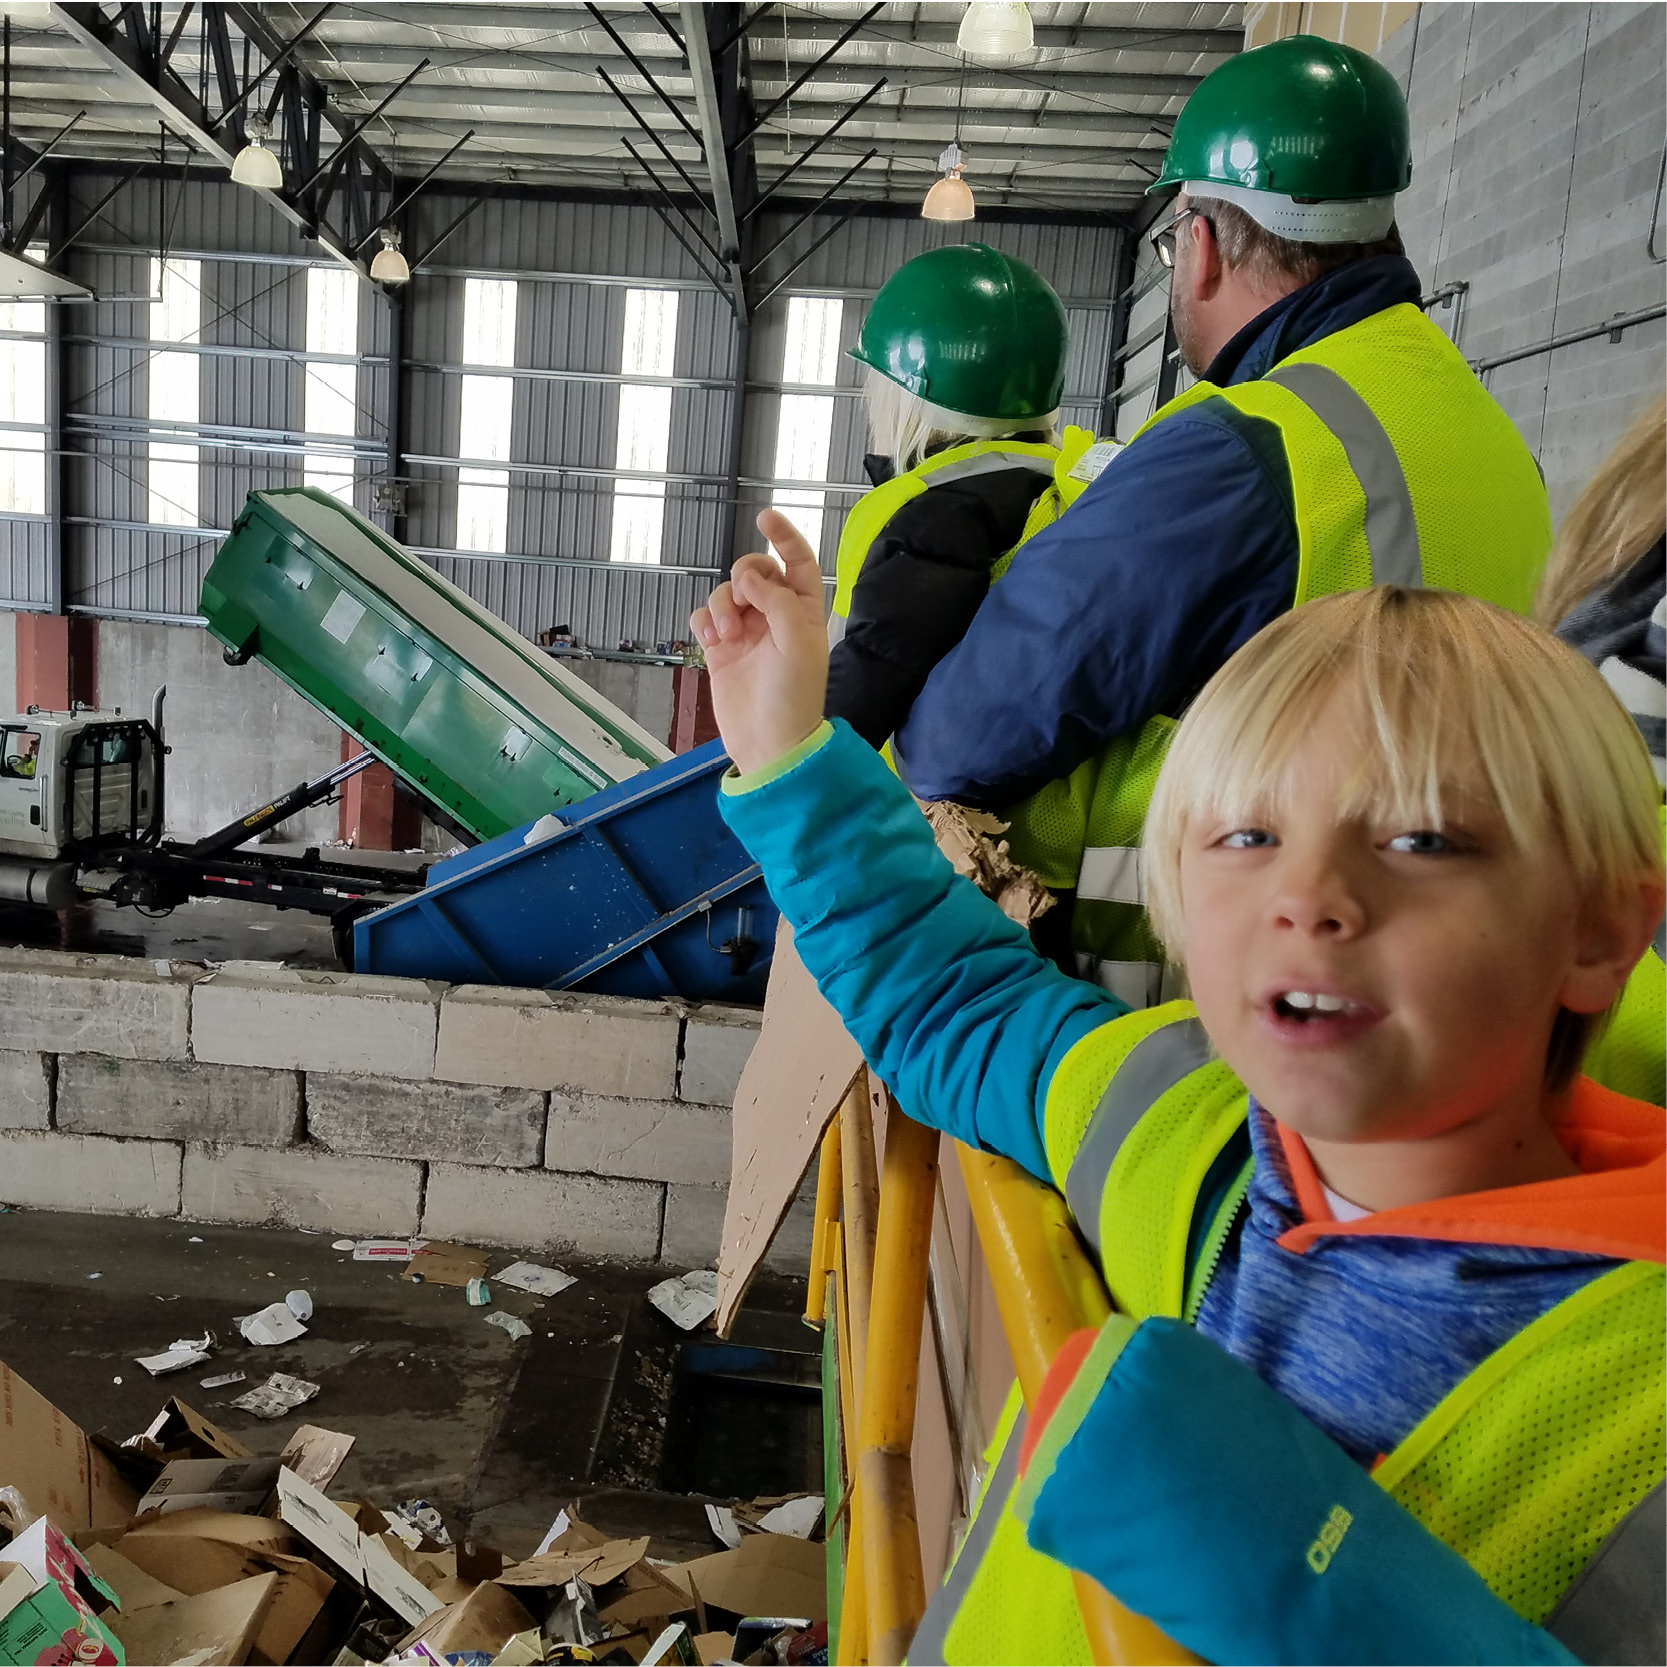 Join a Tour of the Recycling Center!